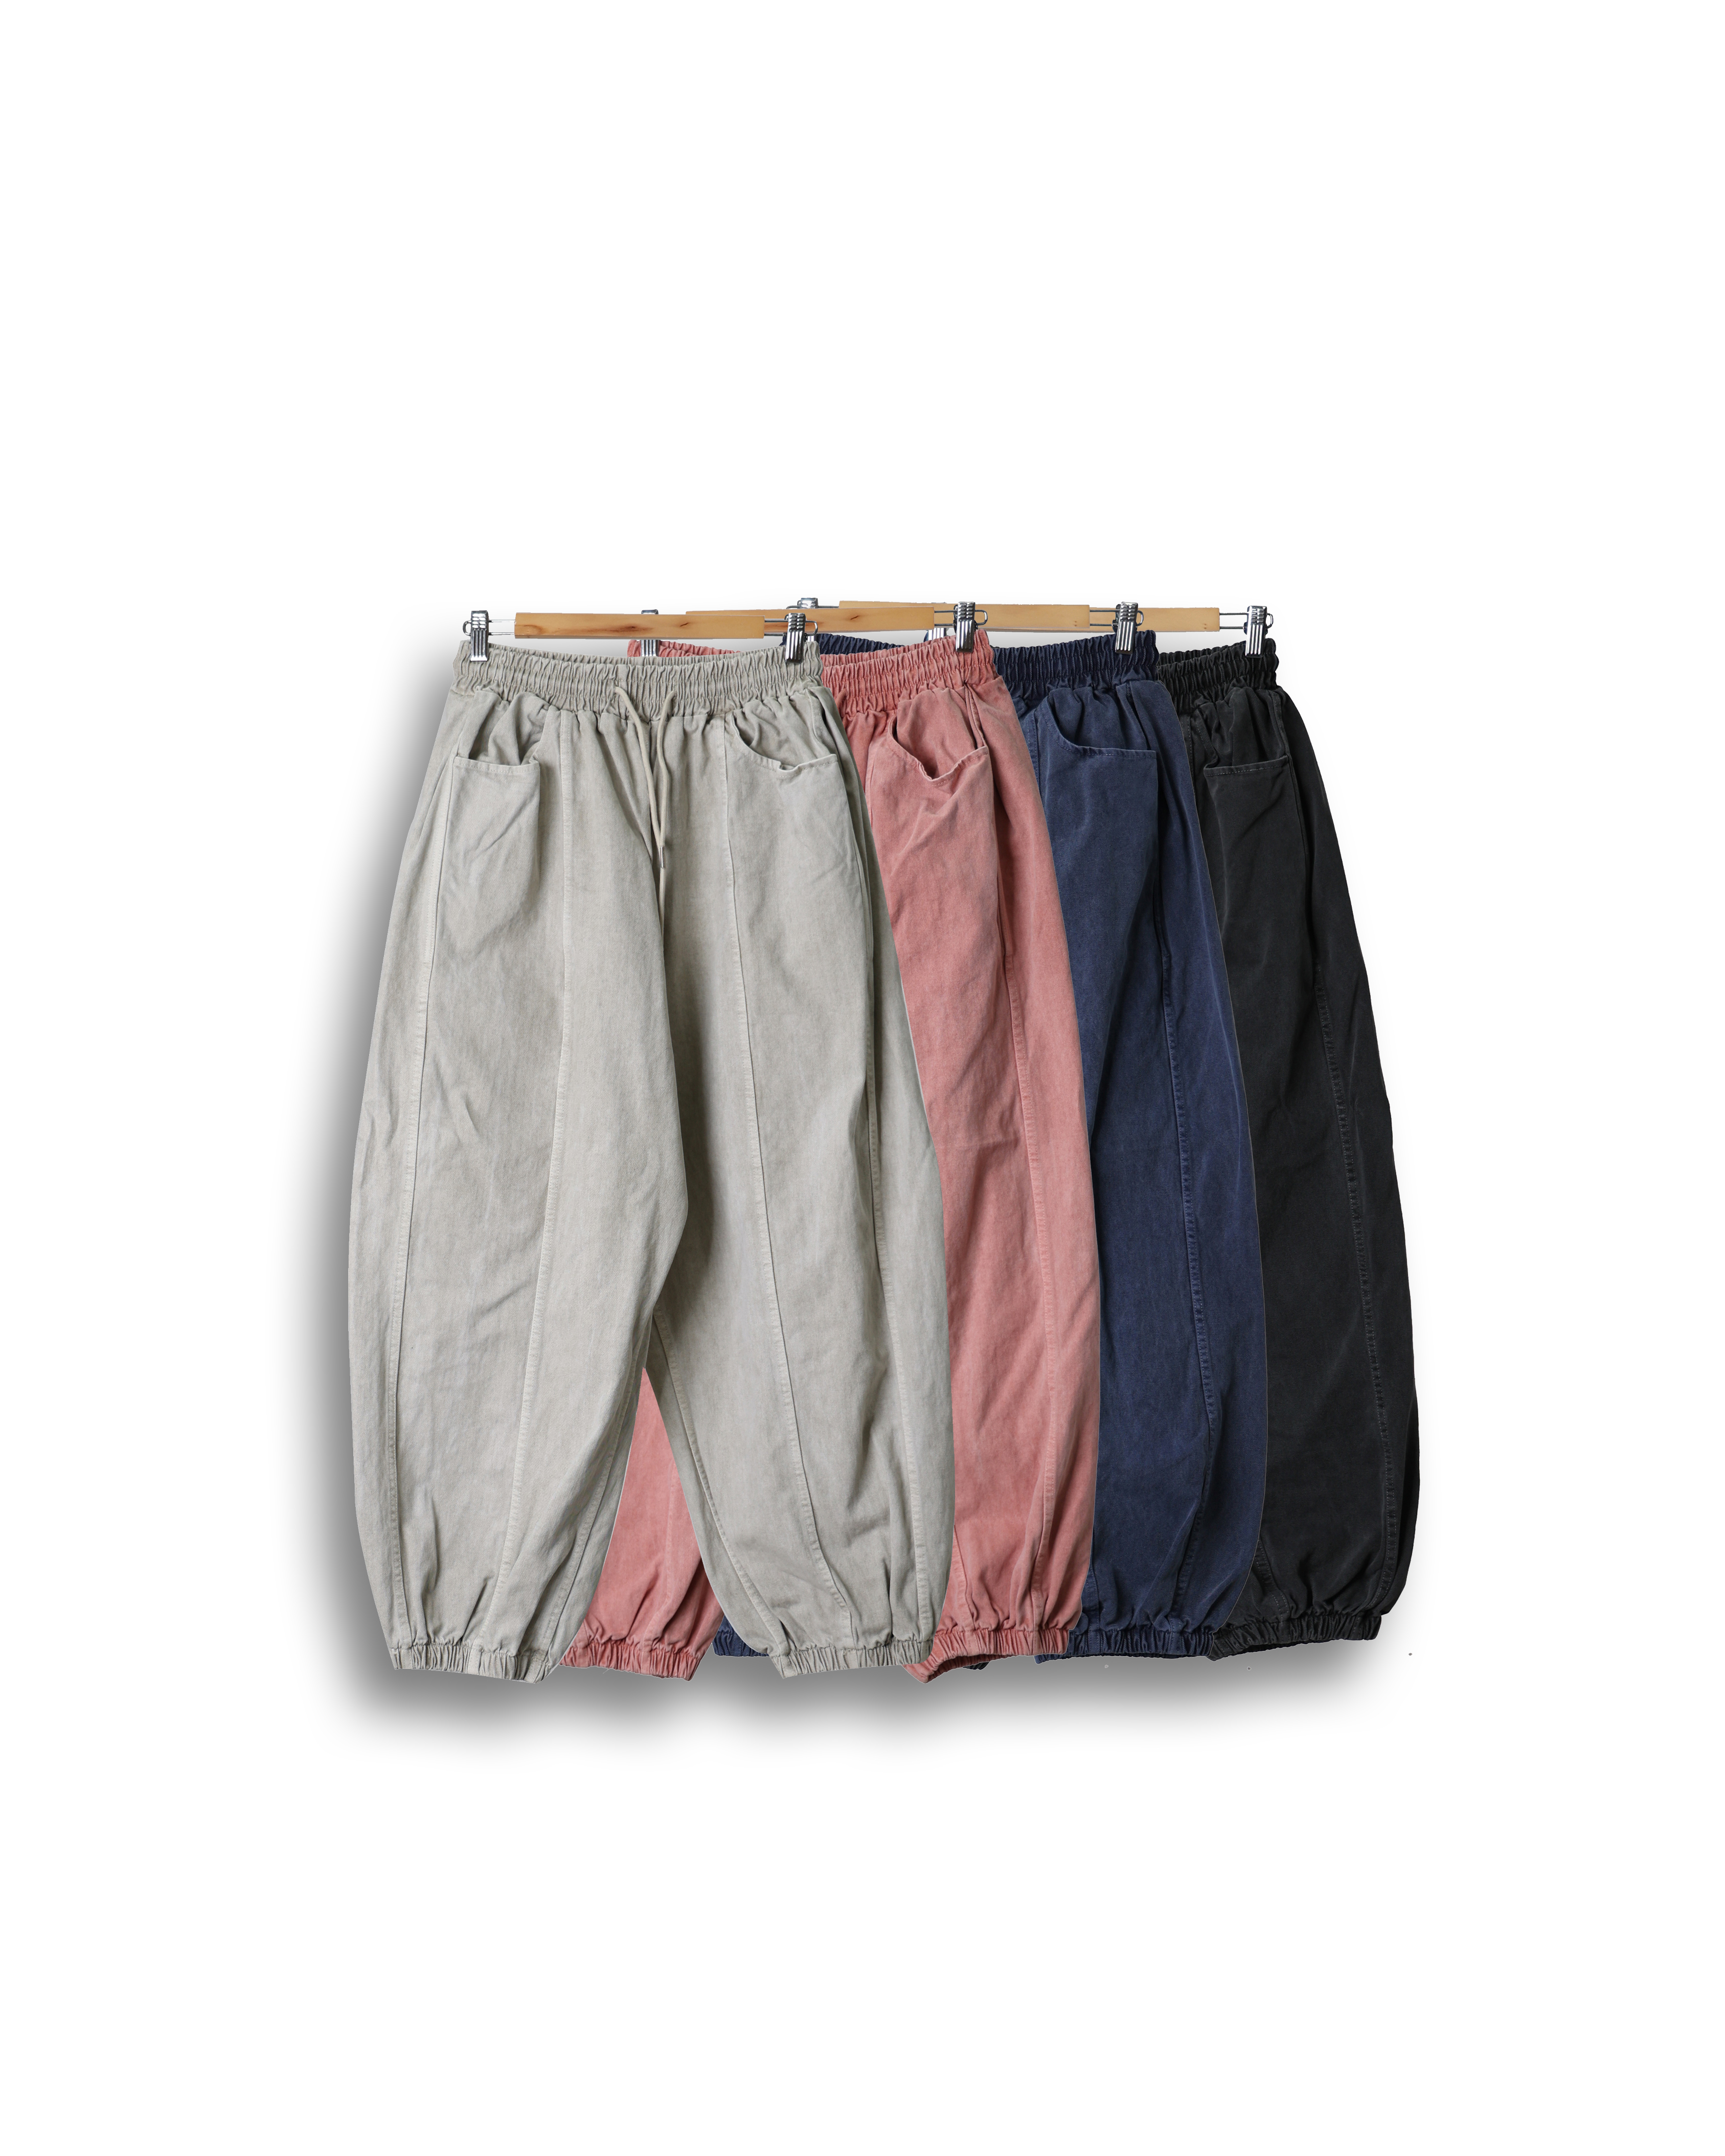 P.CENT Pigments Balloon Jogger Pants (Charcoal/Navy/Beige Gray/Rose Pink)